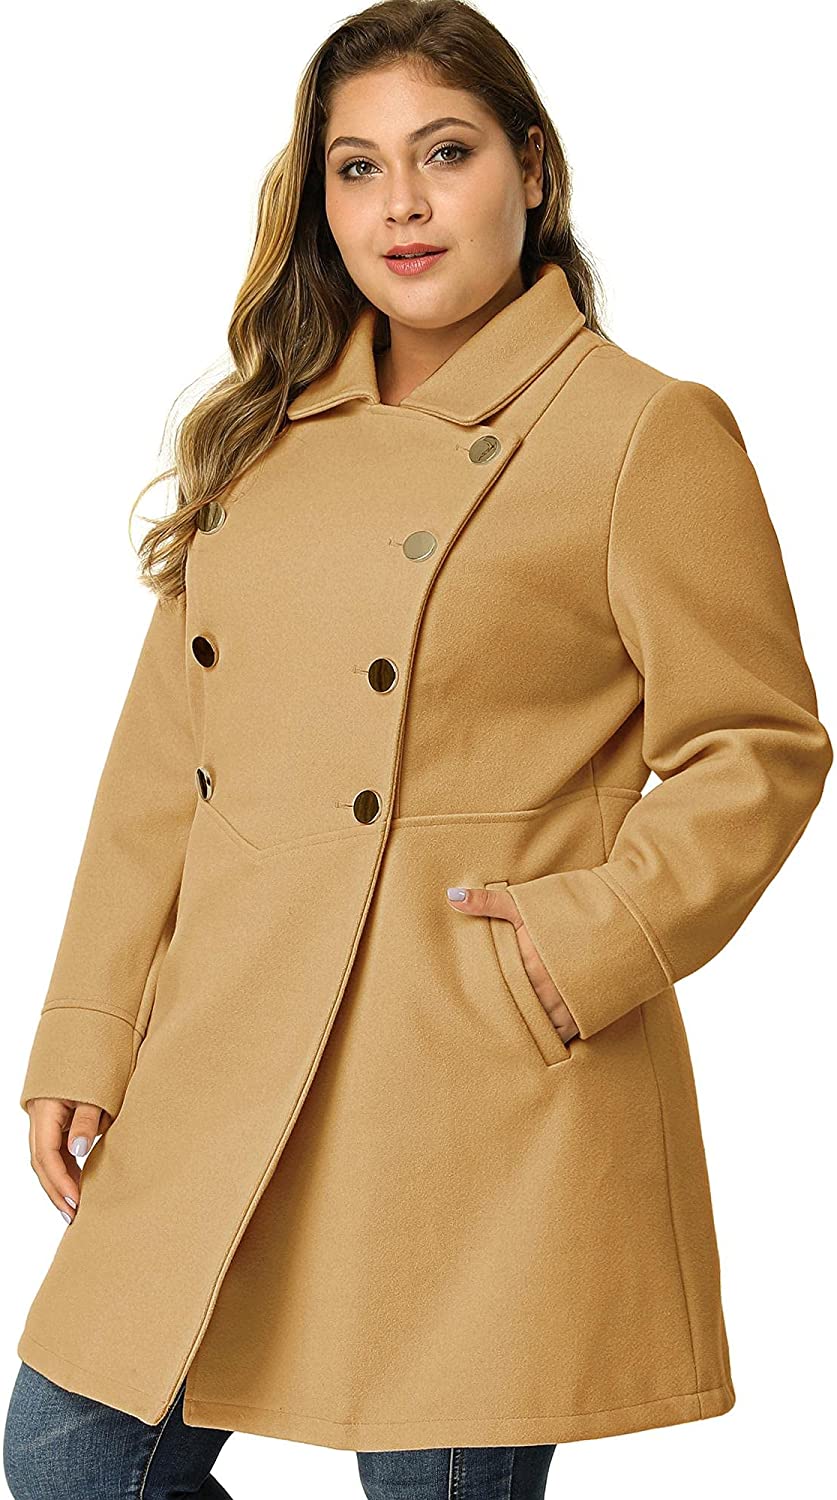 Agnes Orinda Womens Plus Size A-Line Peter Pan Collar Double Breasted Coat